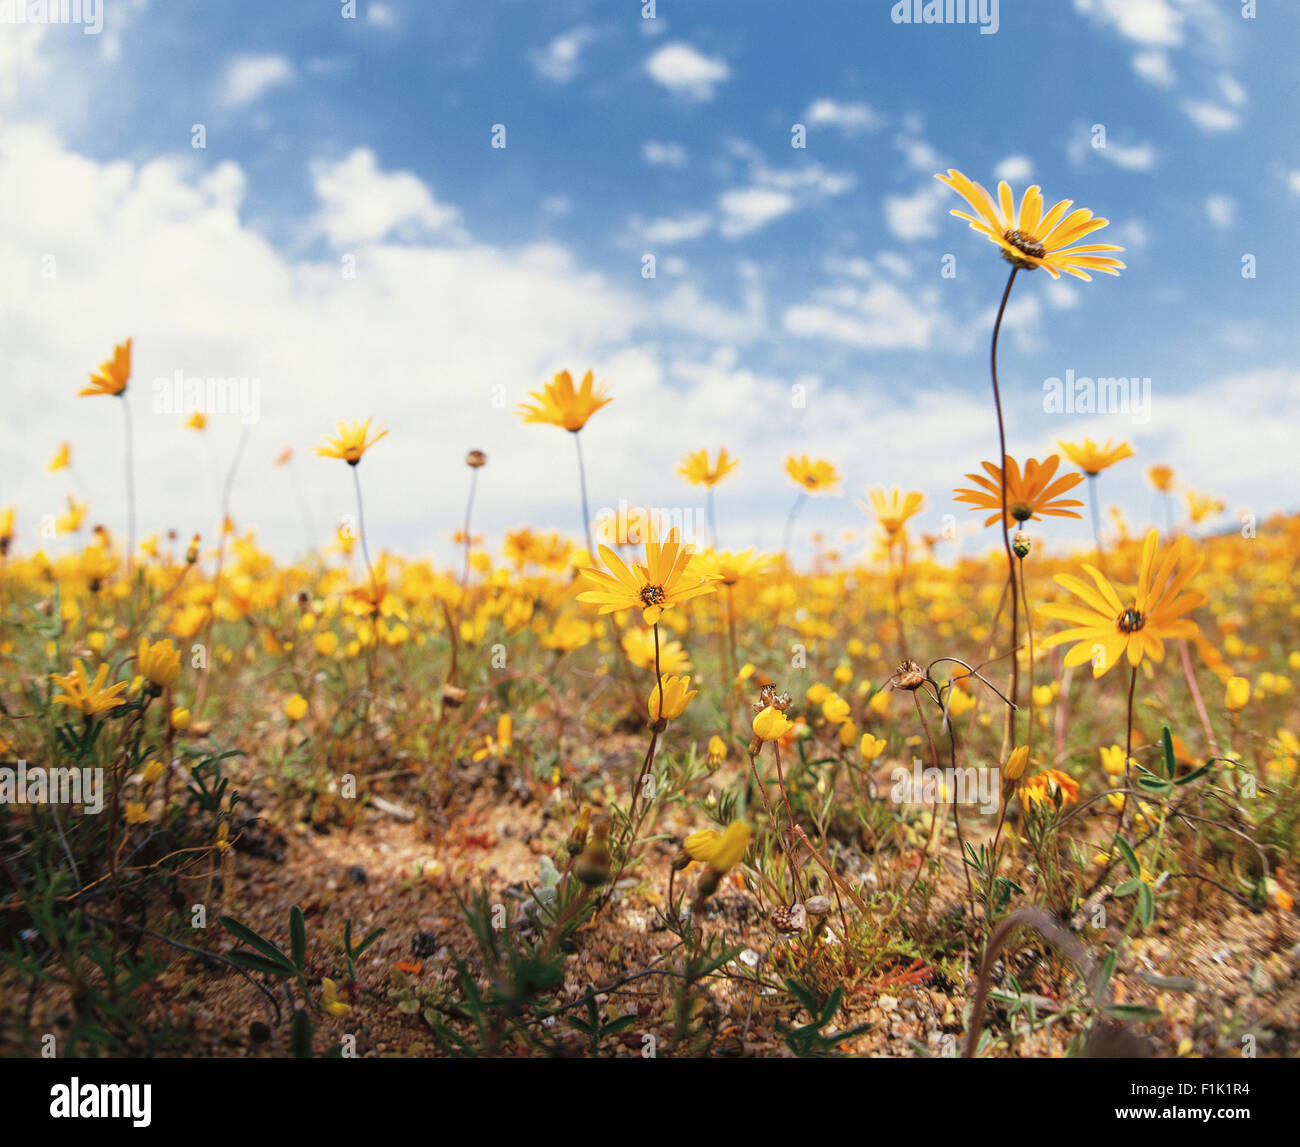 Field of yellow daisies against blue sky with clouds. Namaqualand, Northern Cape, South Africa, Africa. Stock Photo